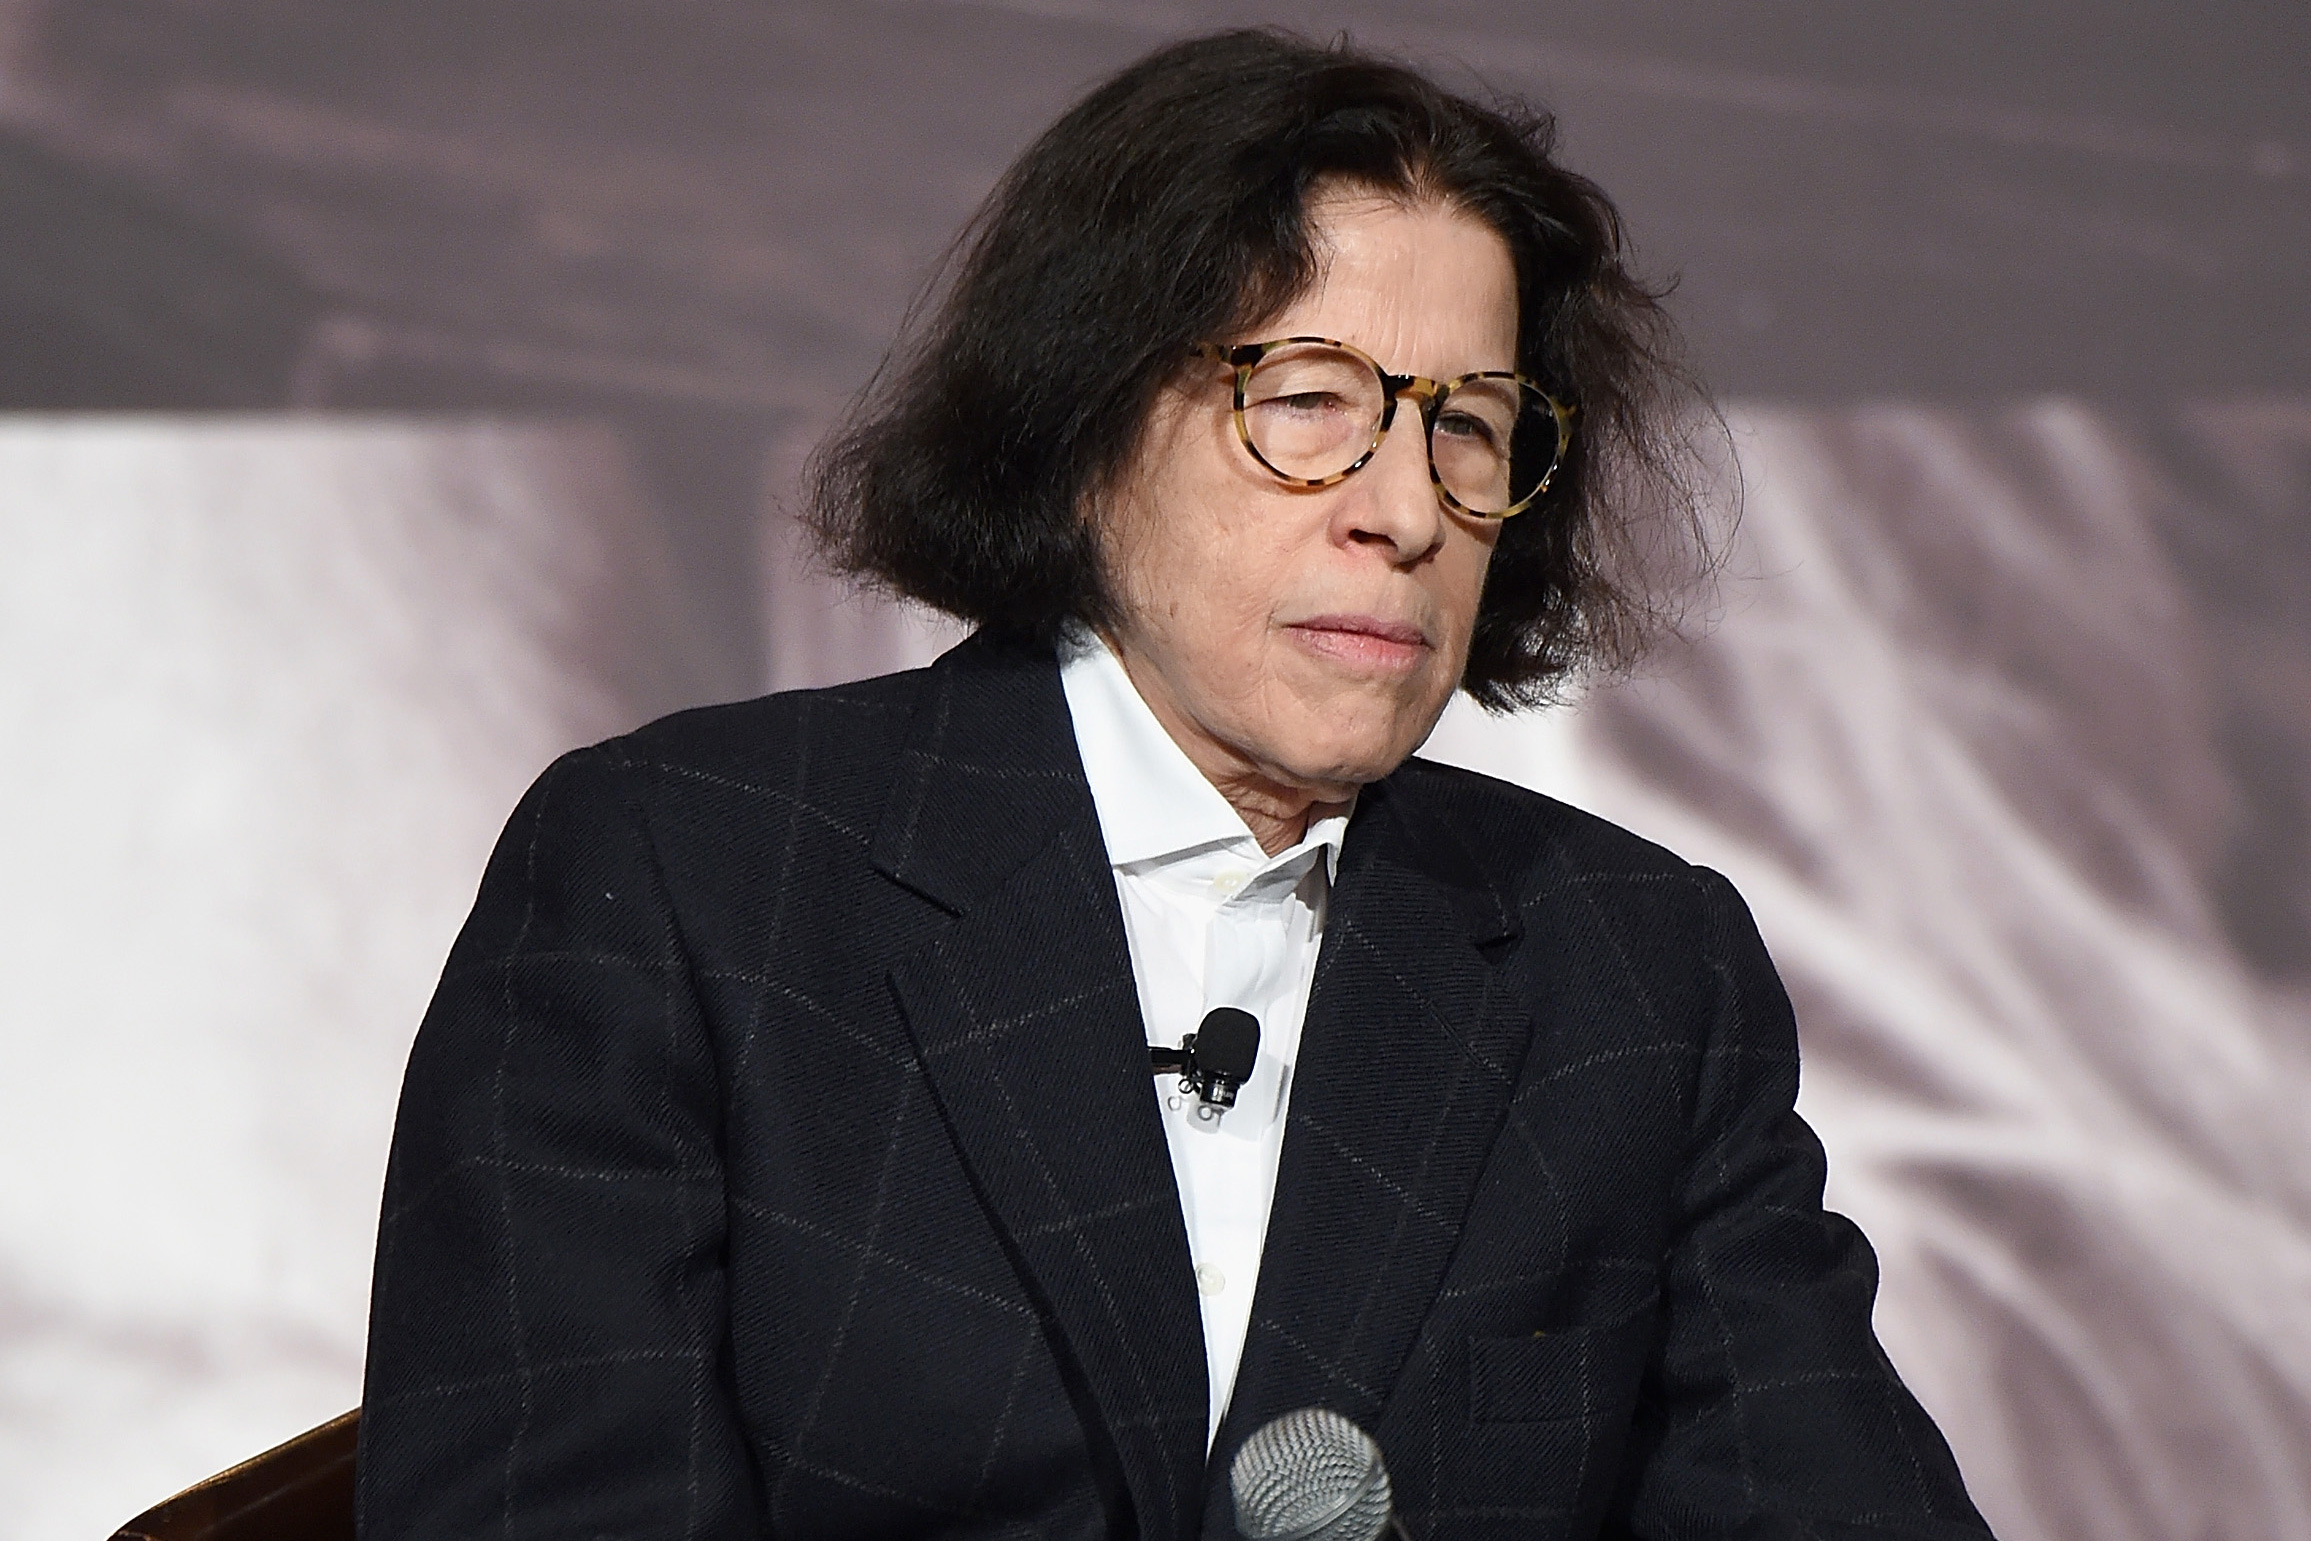 Fran Lebowitz If beauty was within, there’d be no models Page Six